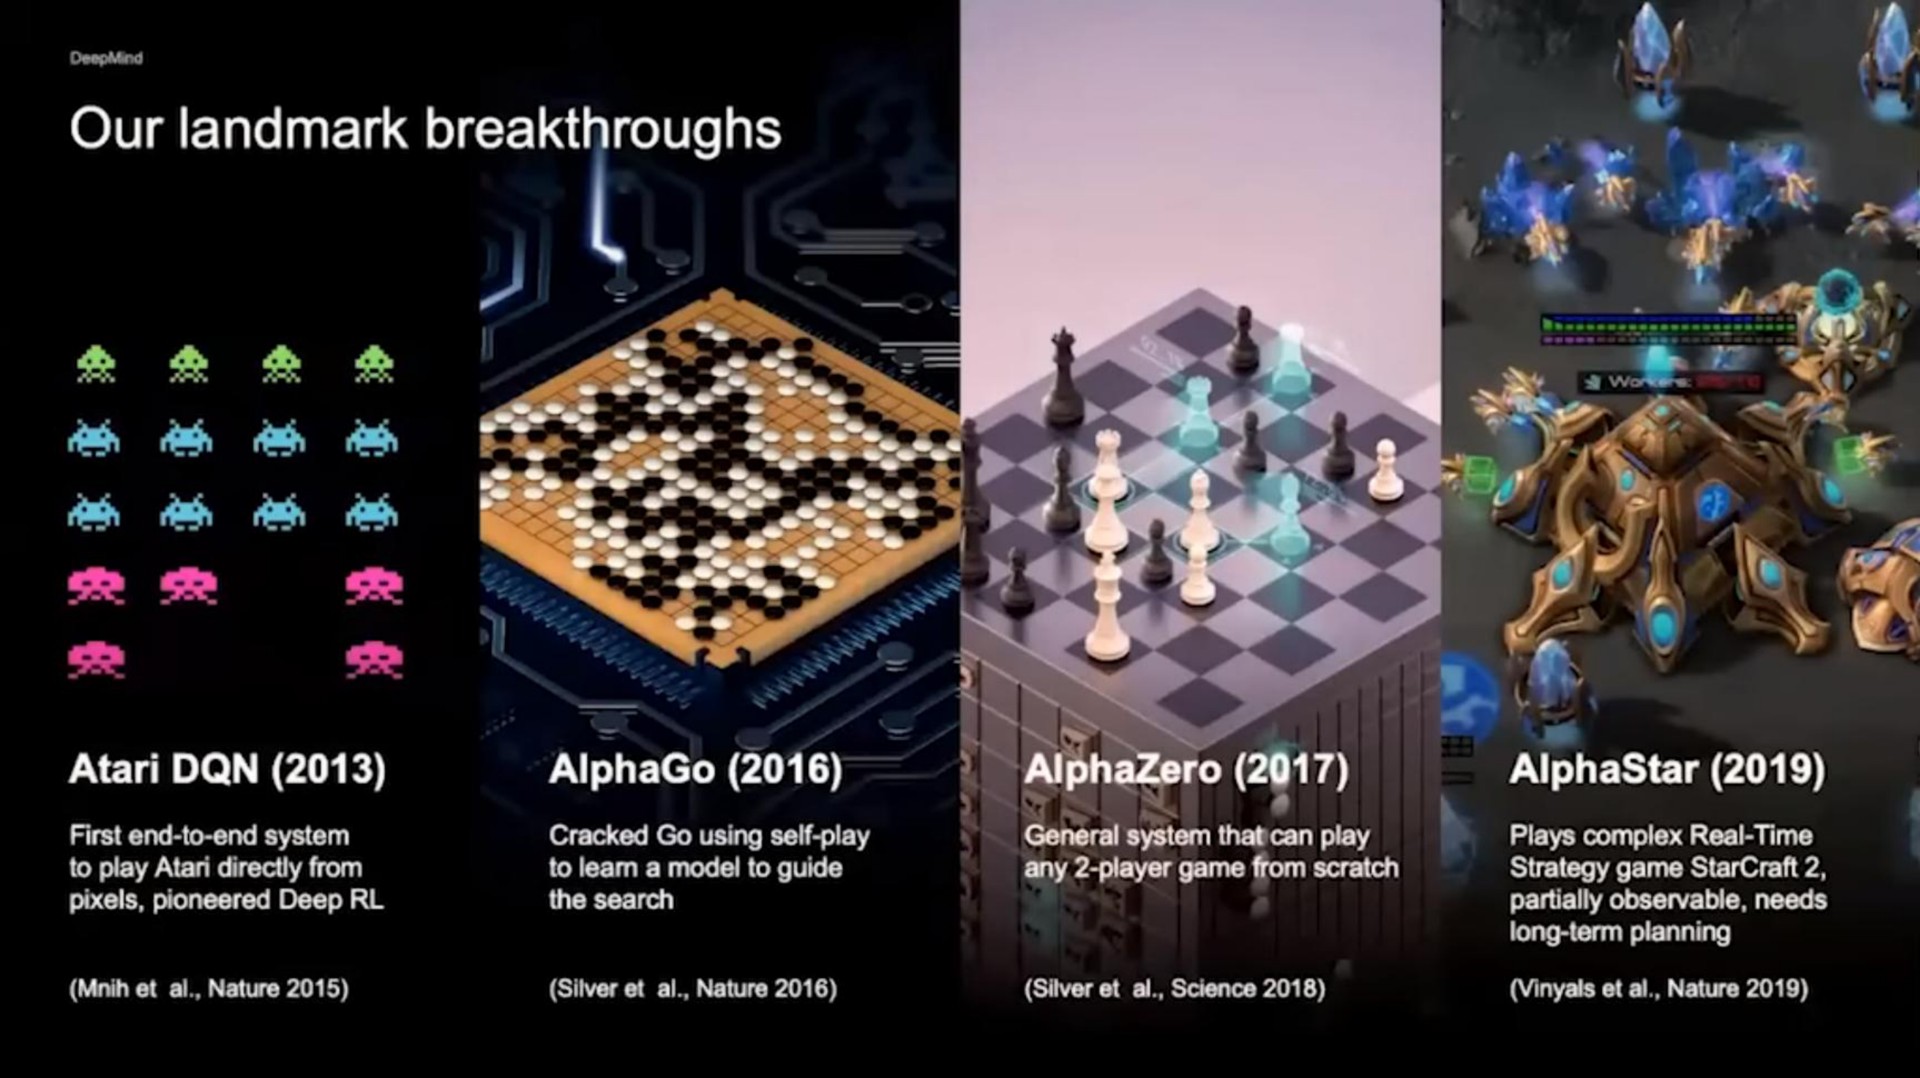 our landmark breakthroughs a a a to play directly from me ore ere on to leam a model to guide mel sick any player game from scratch plays complex real time game starcraft strategy peel tee silver science nature | DeepMind